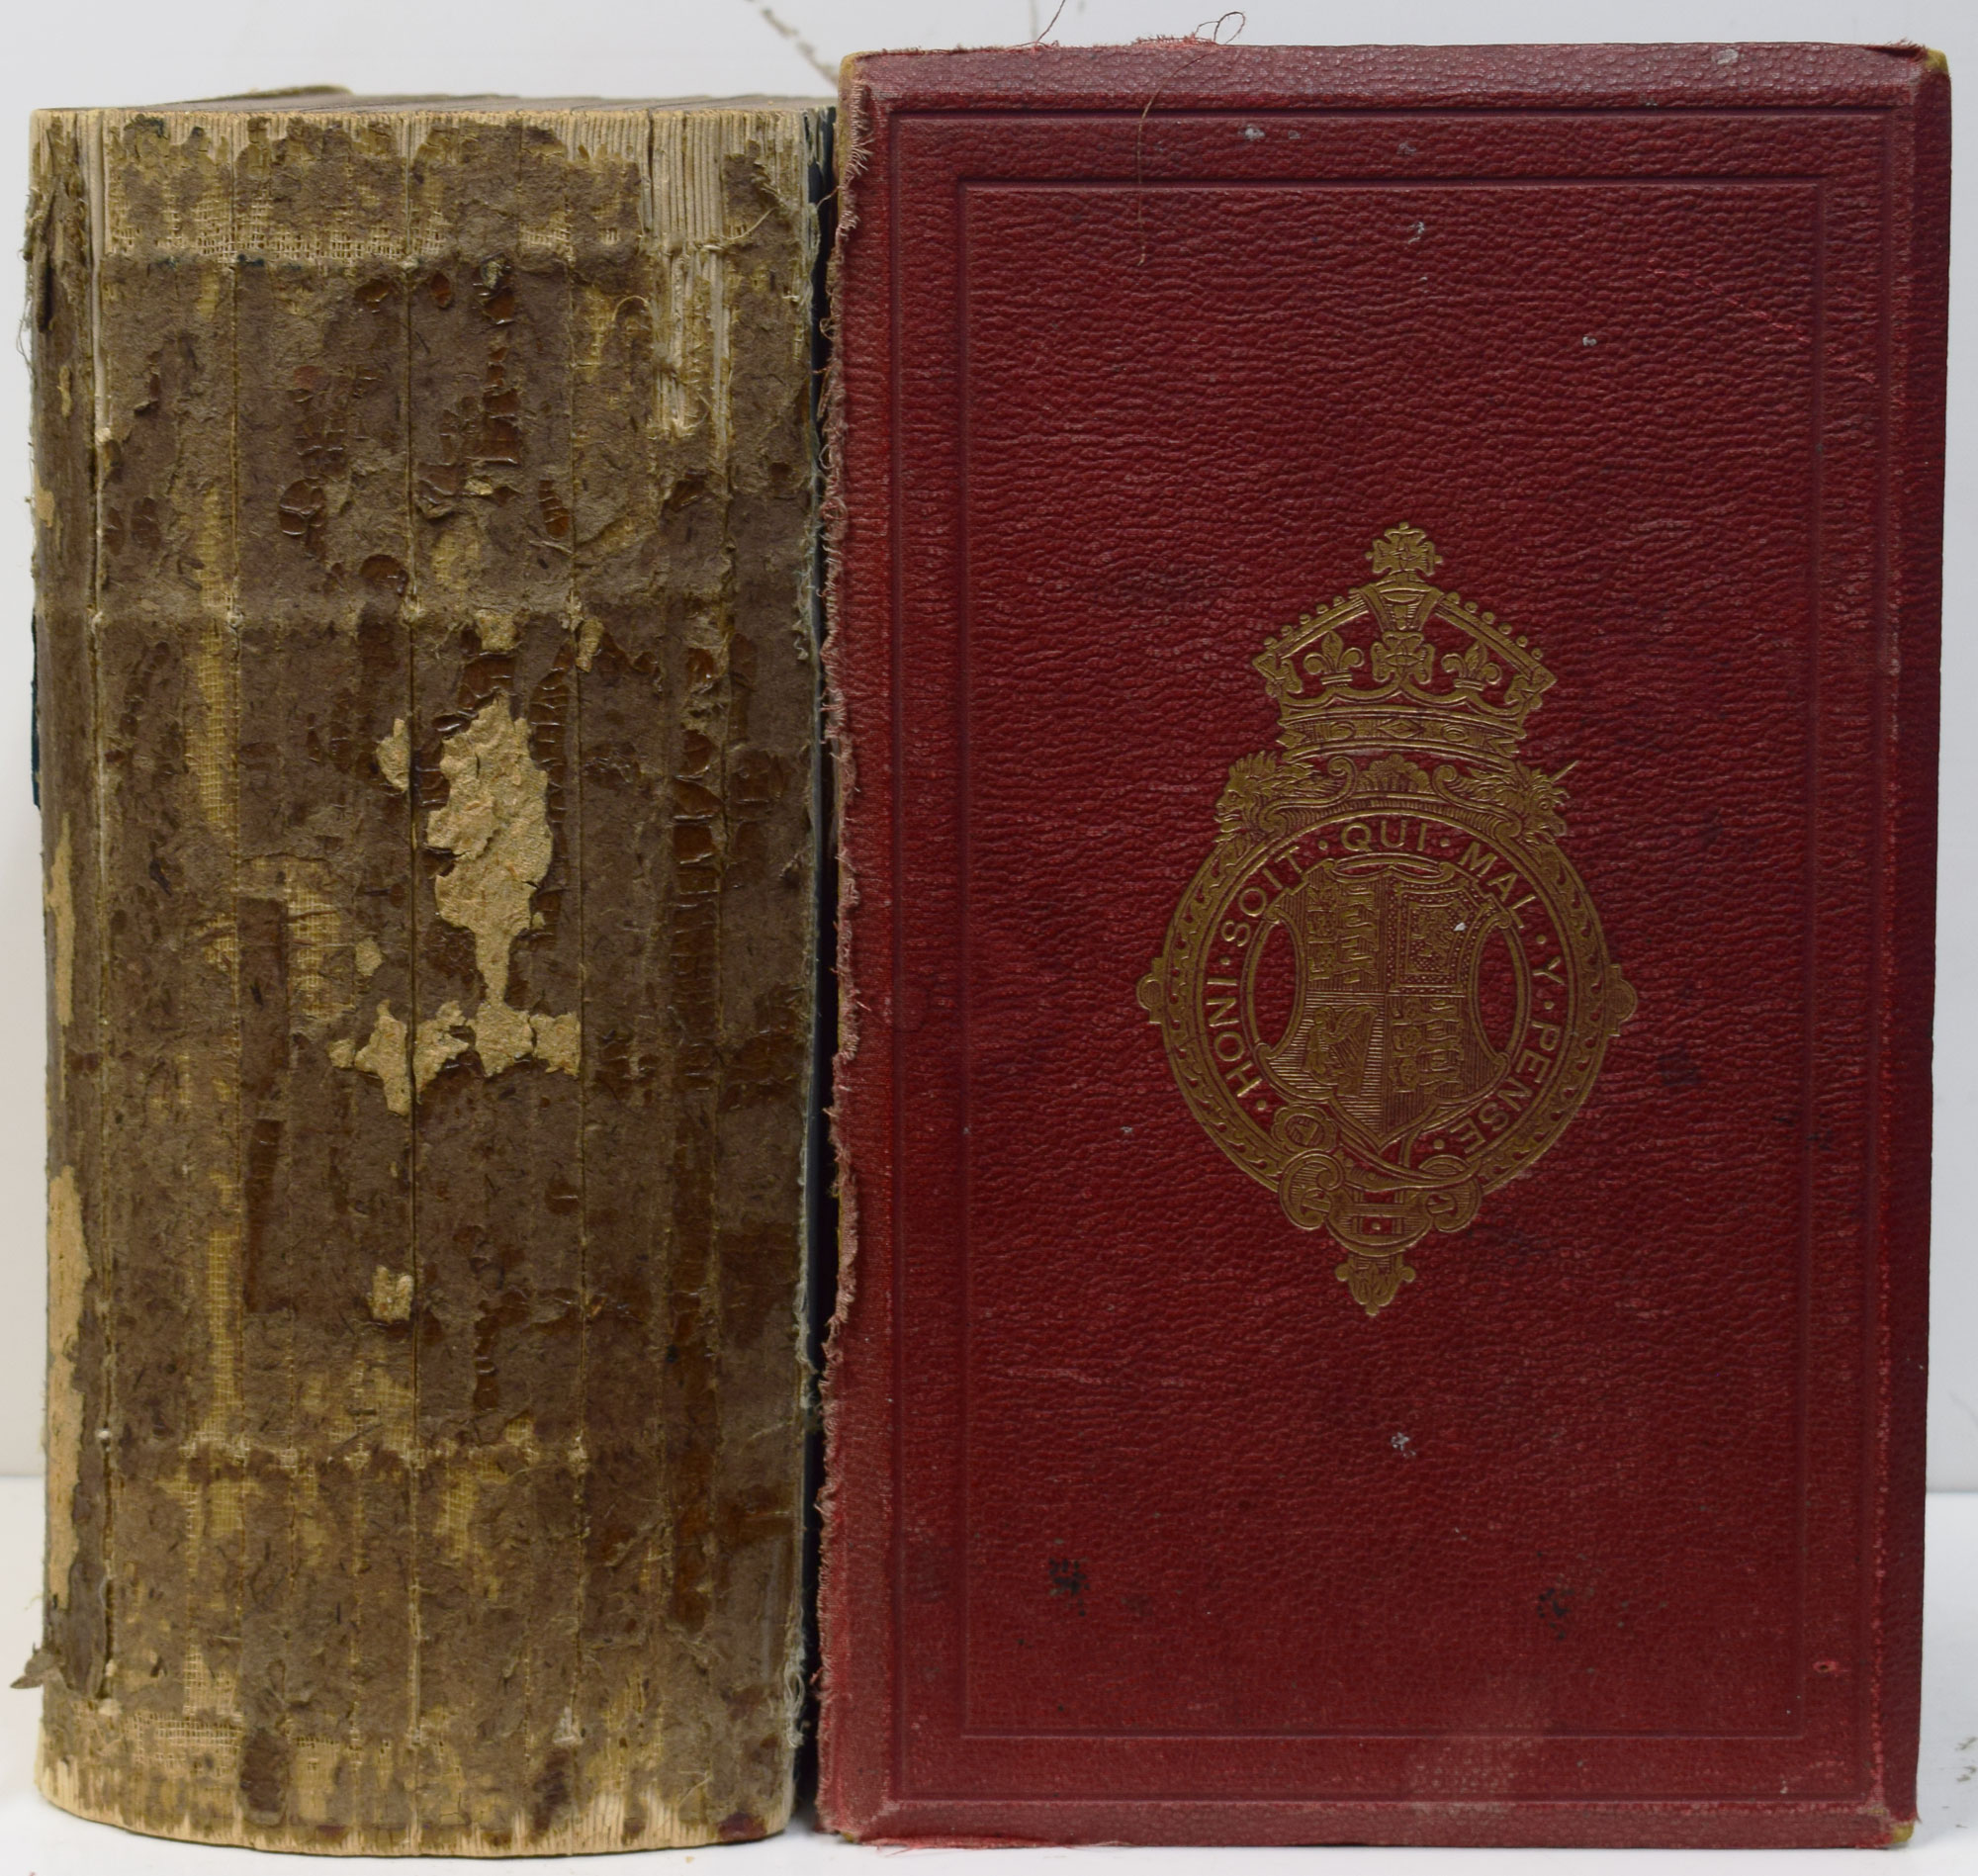 Burke's Peerage 1888. A Genealogical and Heraldic Dictionary of the Peerage and Baronetage. Fiftieth [50th] Edition